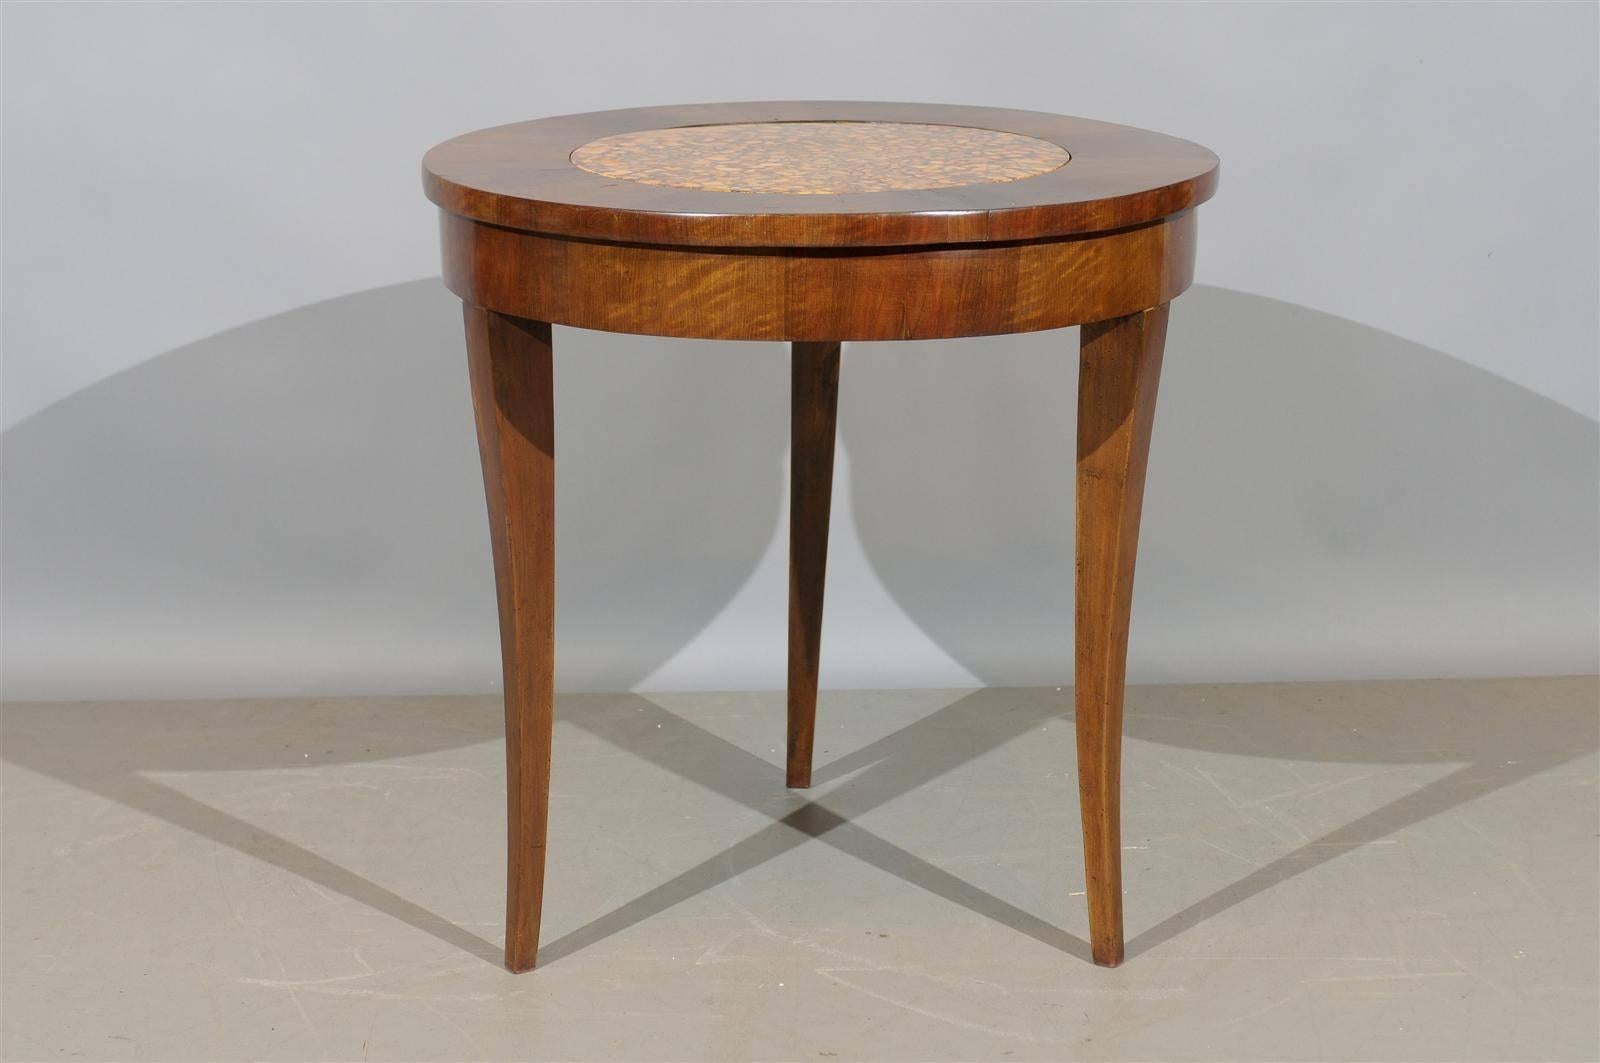 An Italian walnut gueridon with inset faux marble top.

